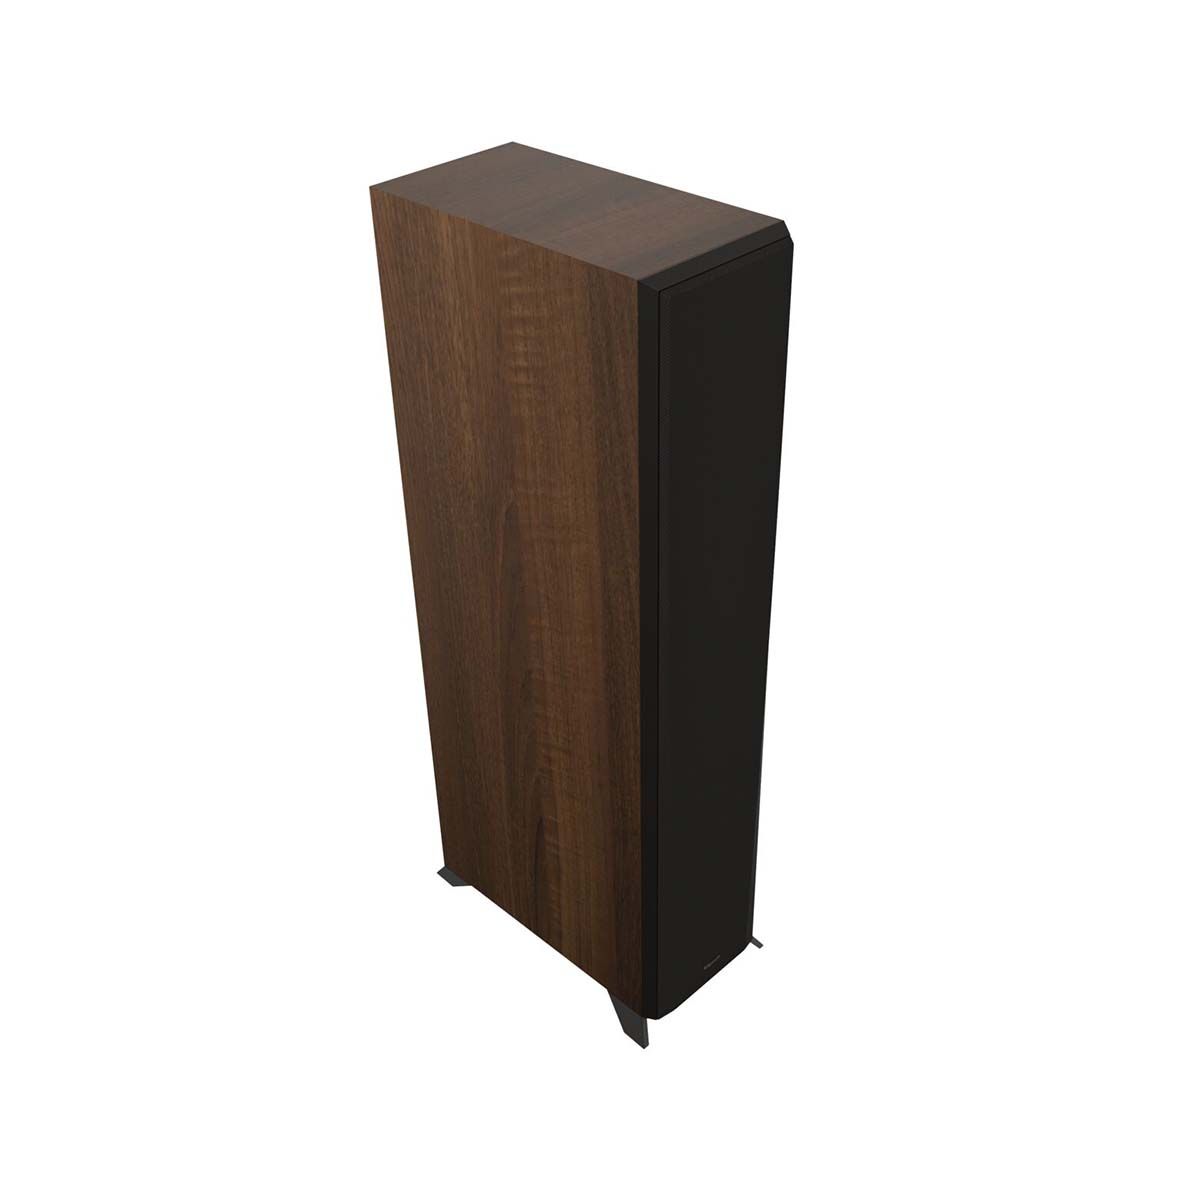 Klipsch RP-6000F II Floorstanding Speaker - Walnut - angled front view with grill